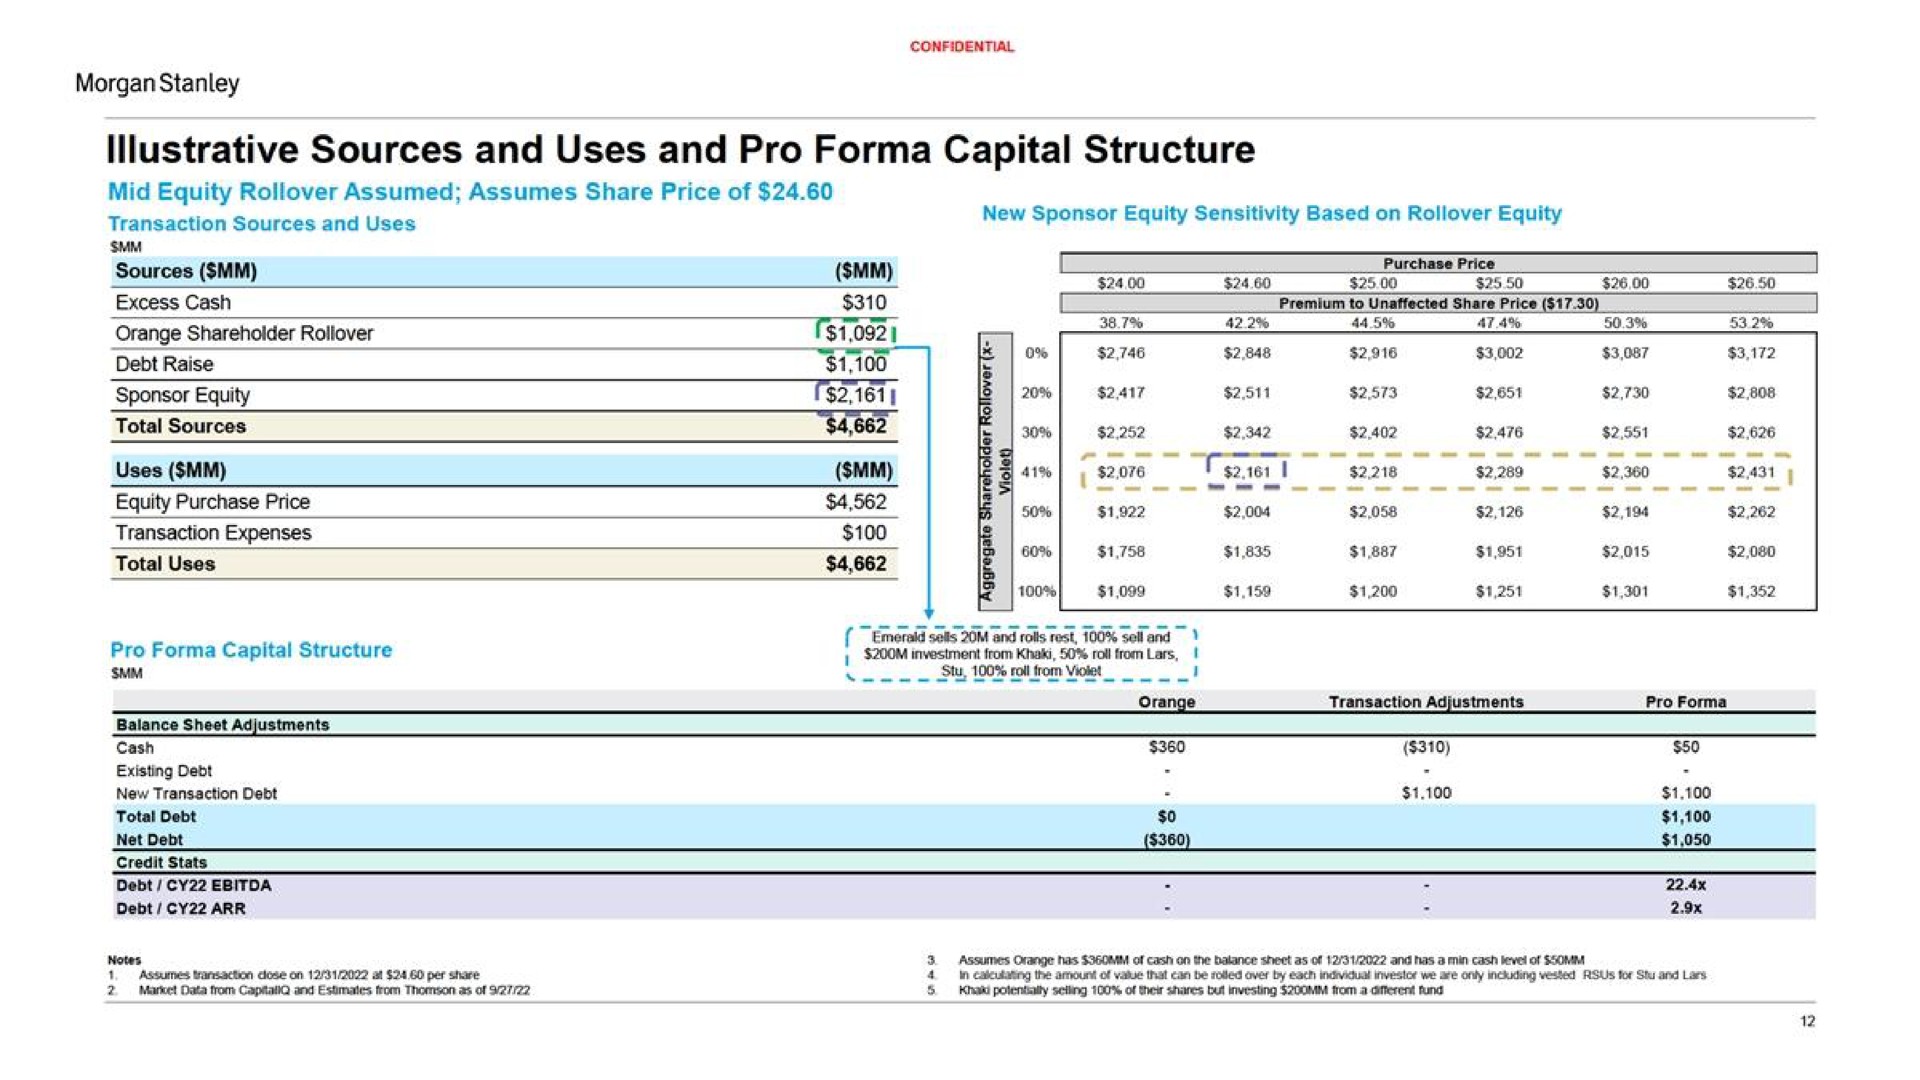 illustrative sources and uses and pro capital structure | Morgan Stanley